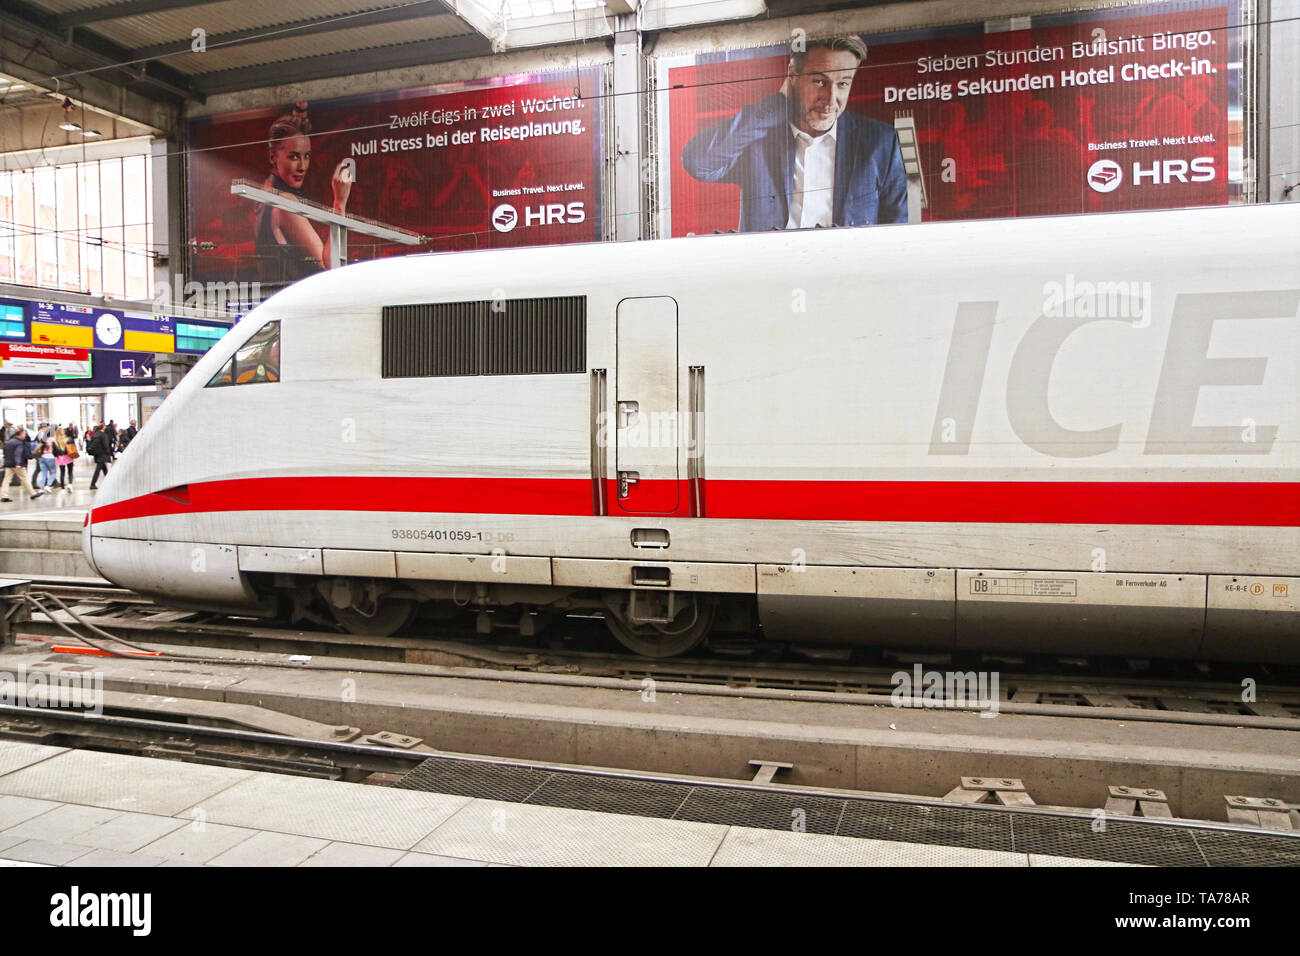 MUNICH, GERMANY - Munich central station departure and arrival hall, ICE Intercity-express train ready at the platform Stock Photo